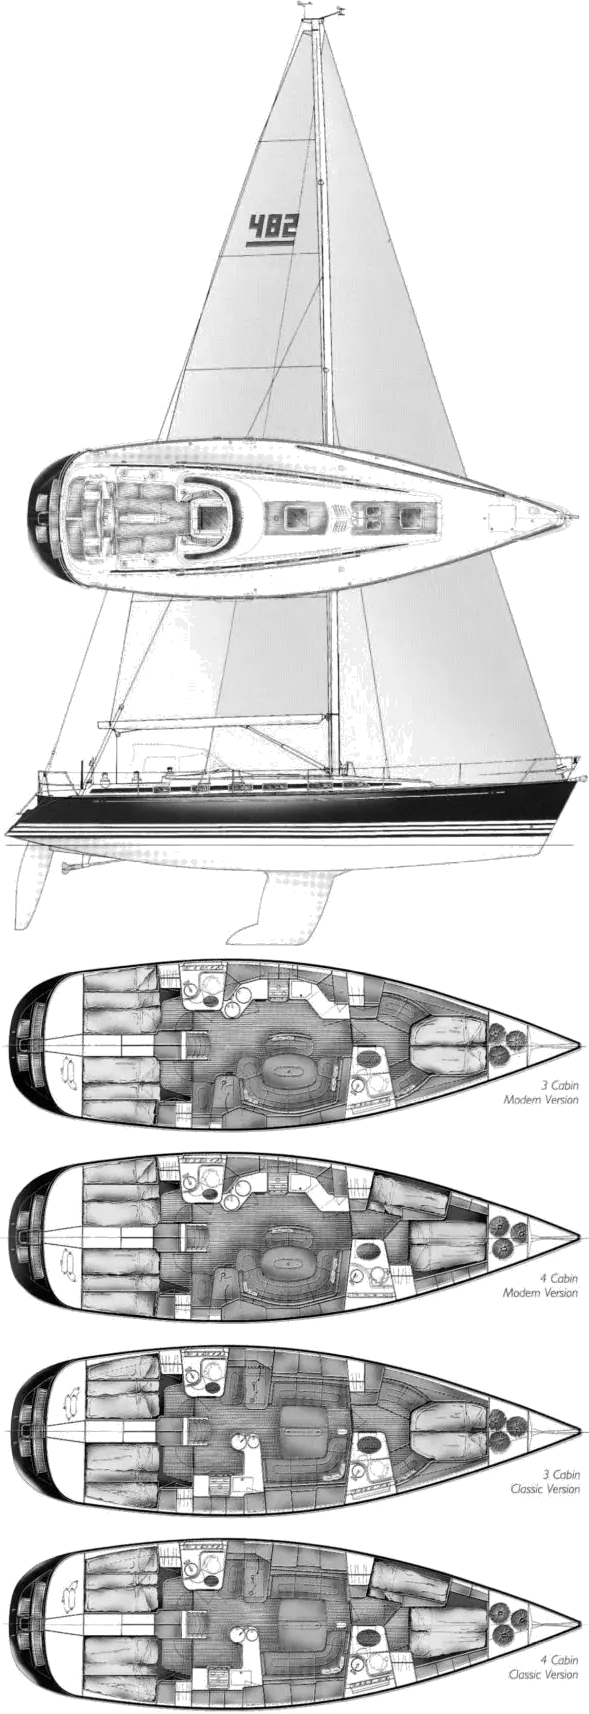 Drawing of X-482